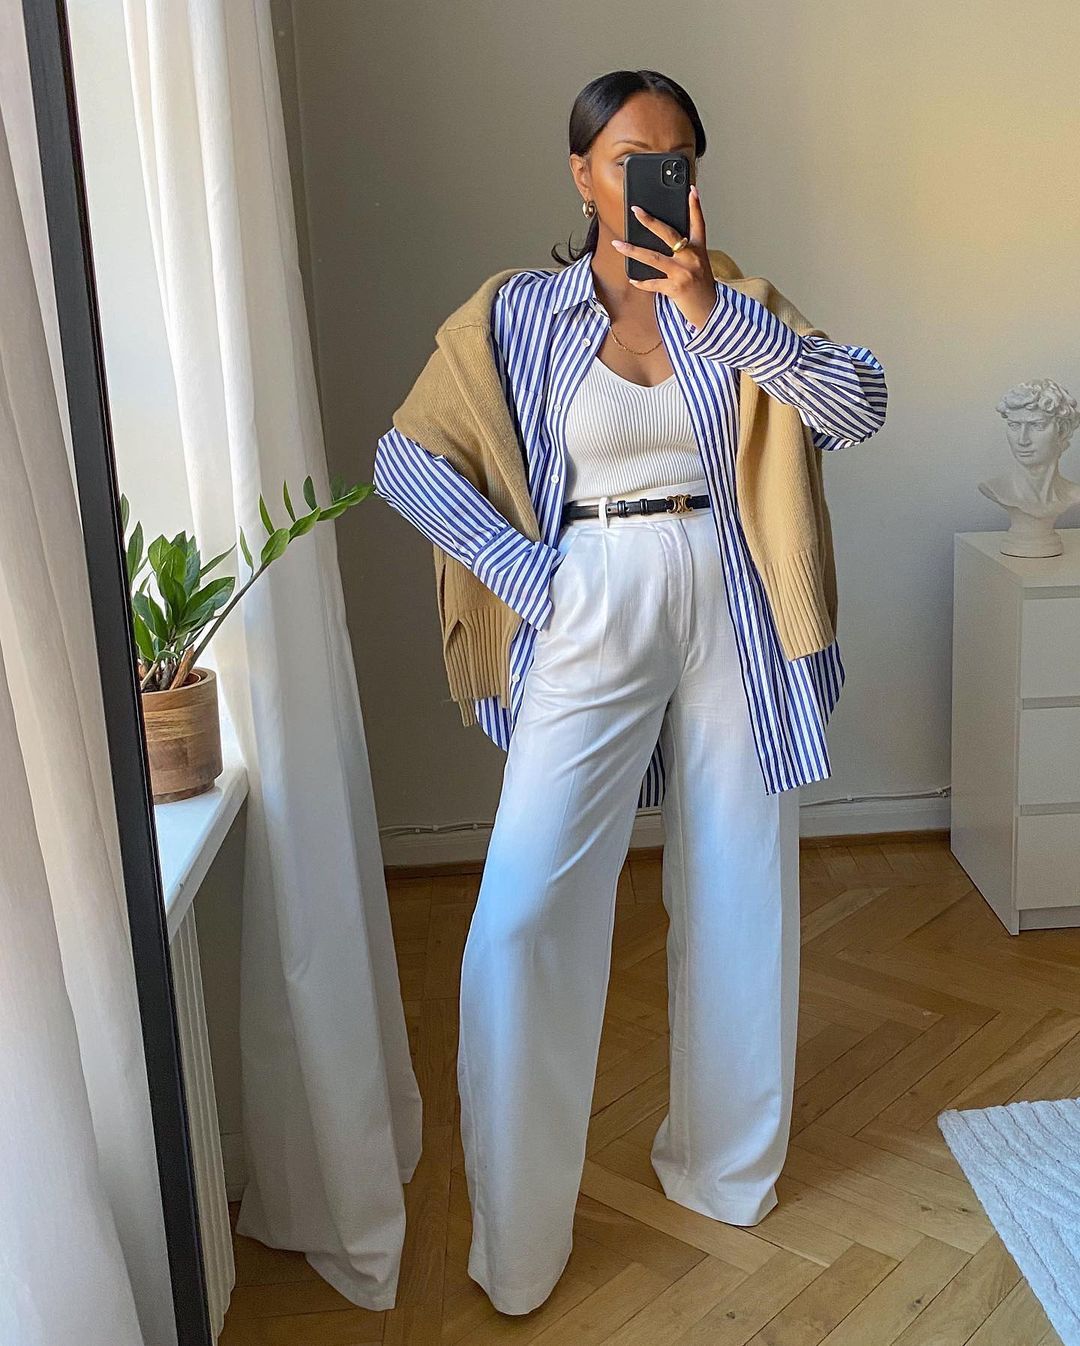 How to wear white pants in fall and winter: An influencers' guide